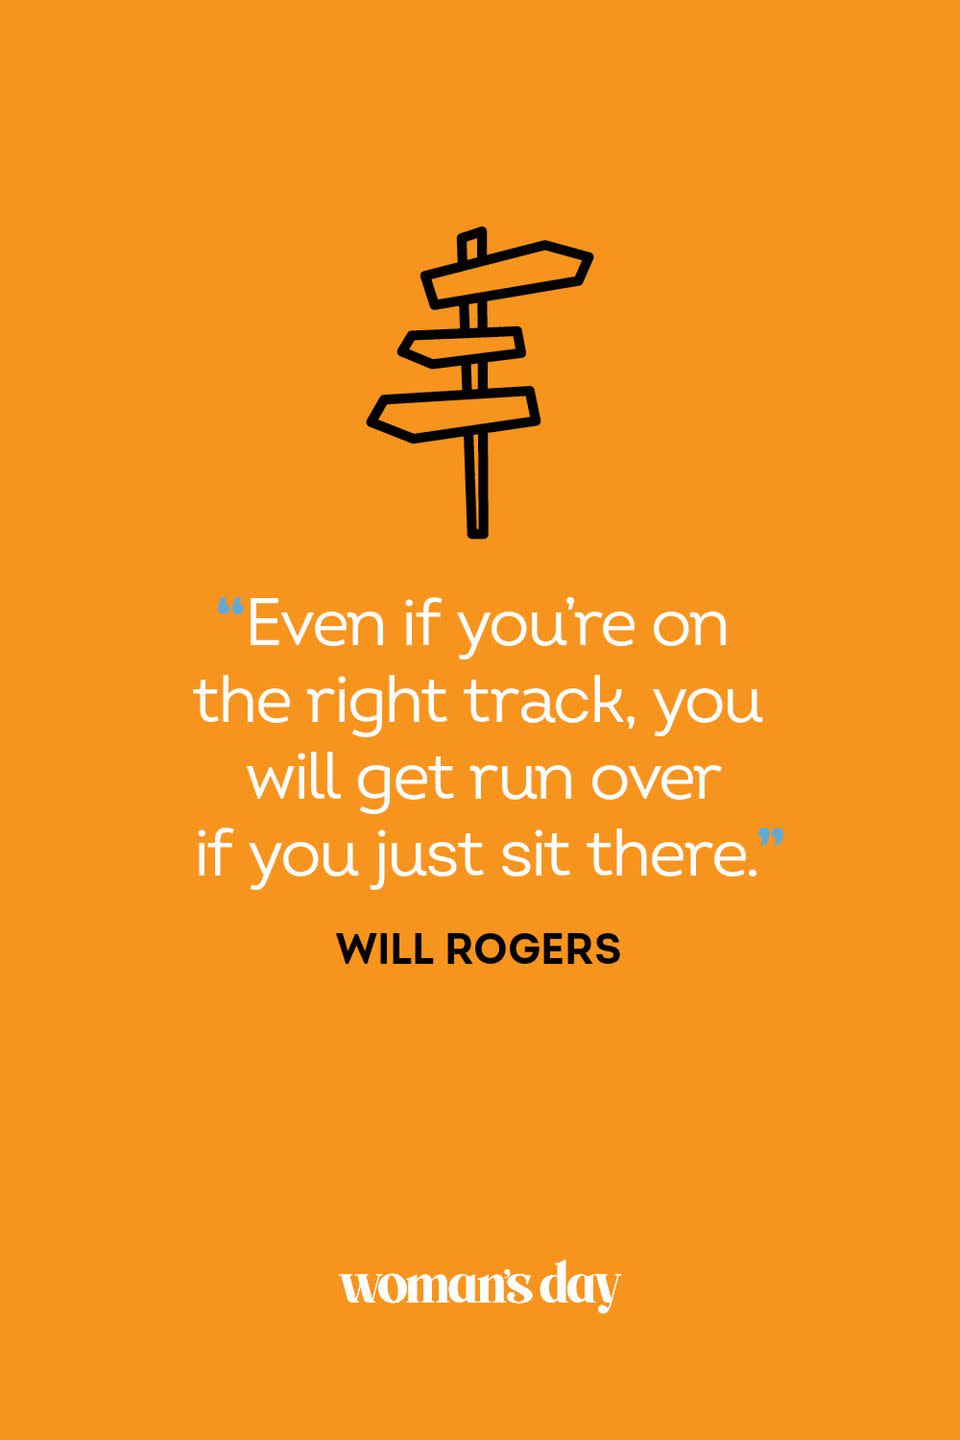 25) Will Rogers